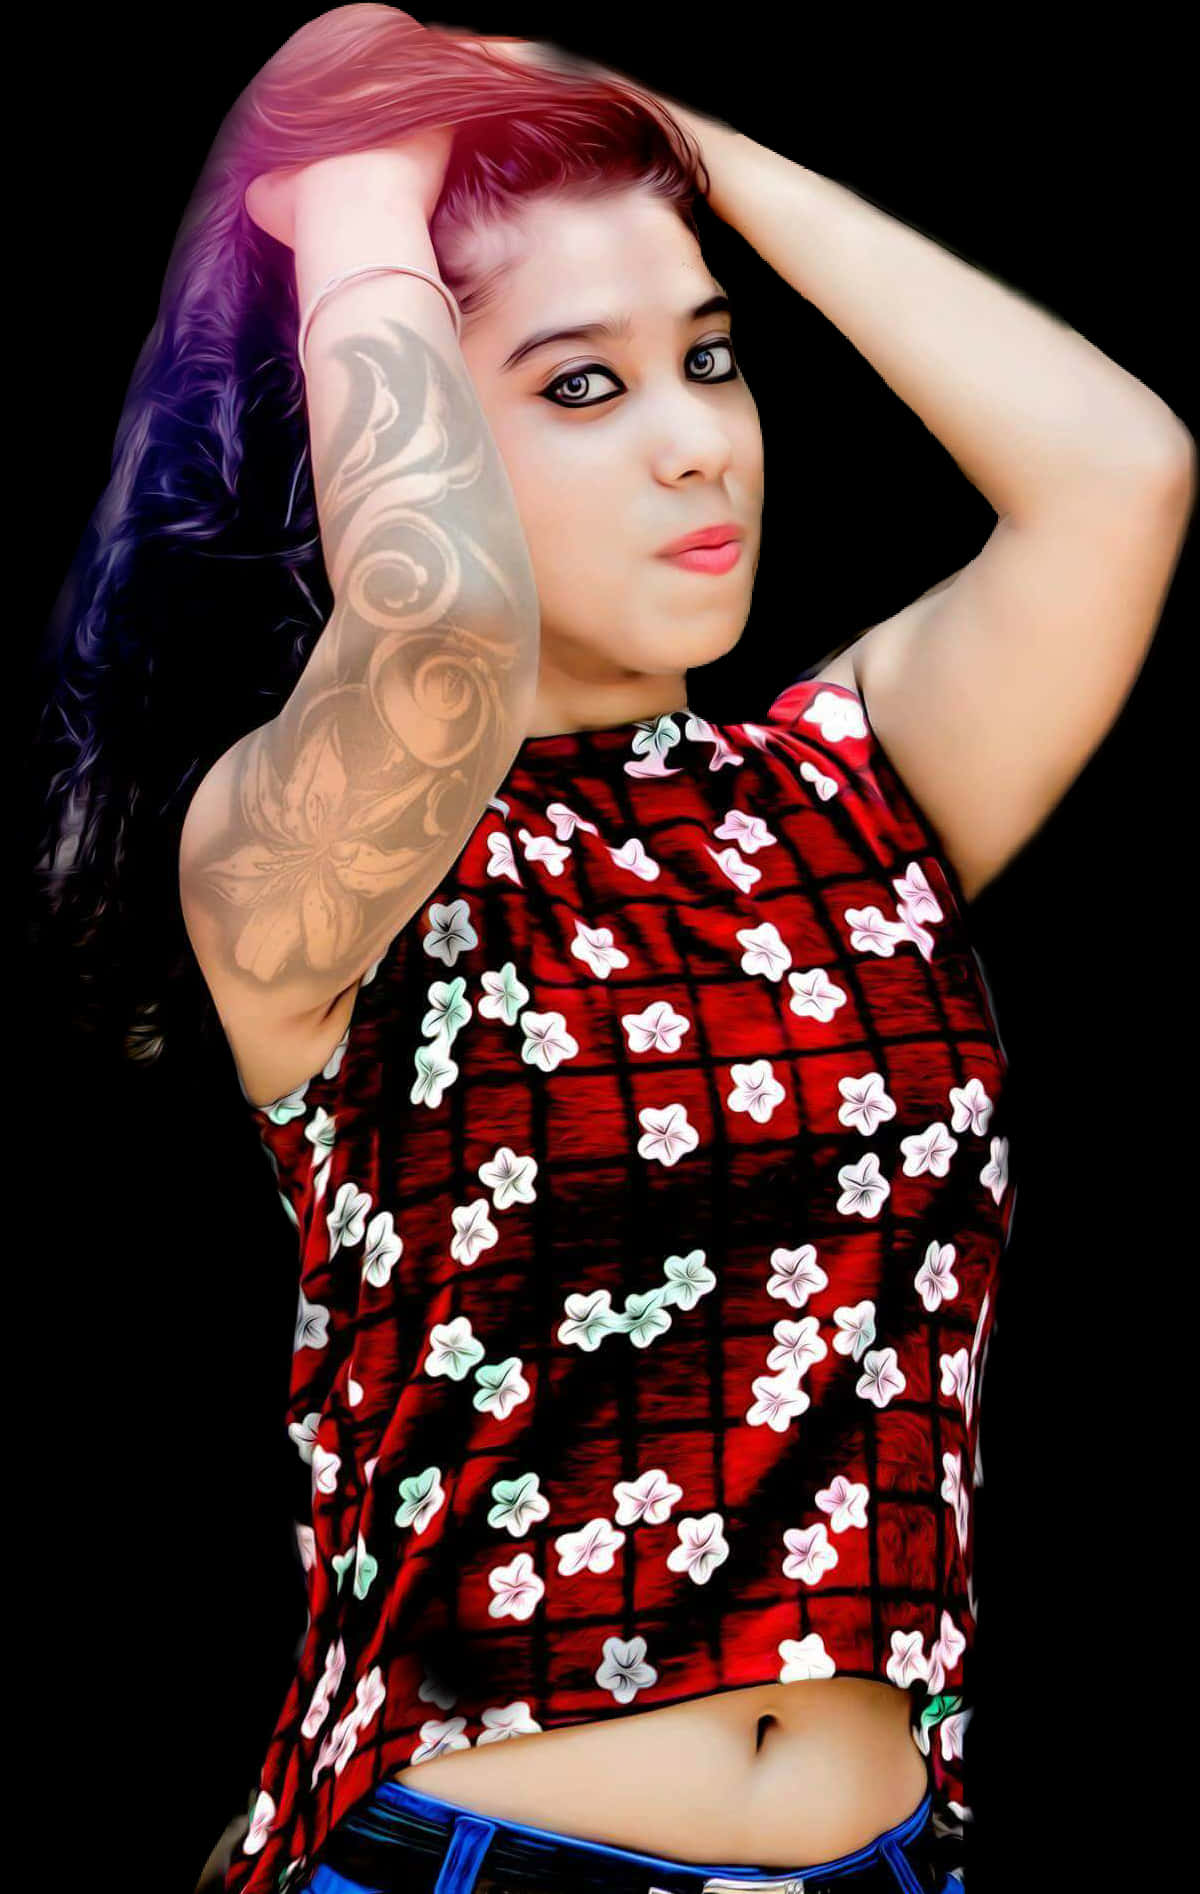 Stylish Girl Floral Top Tattoo